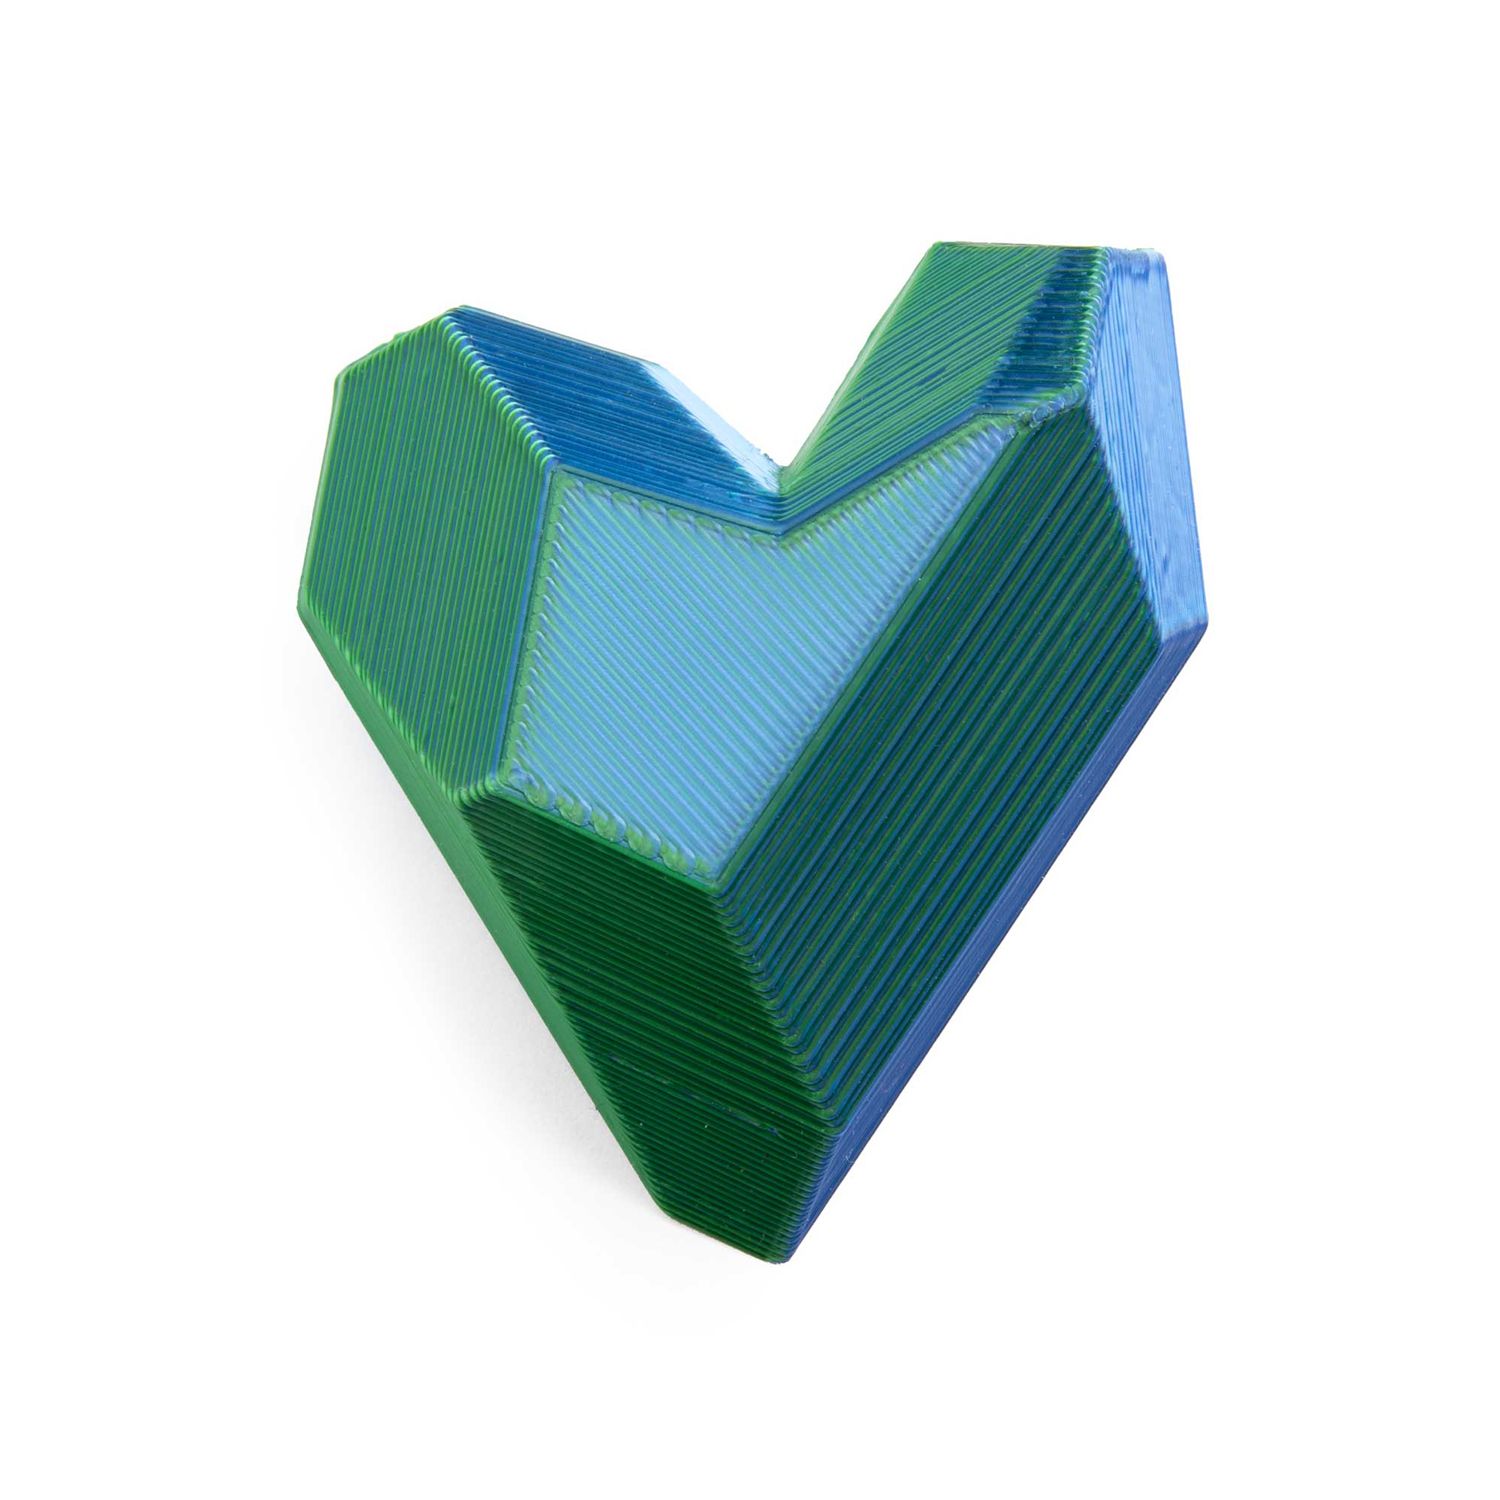 Maison 203: Heart Brooch – Aurora Product Image 1 of 3